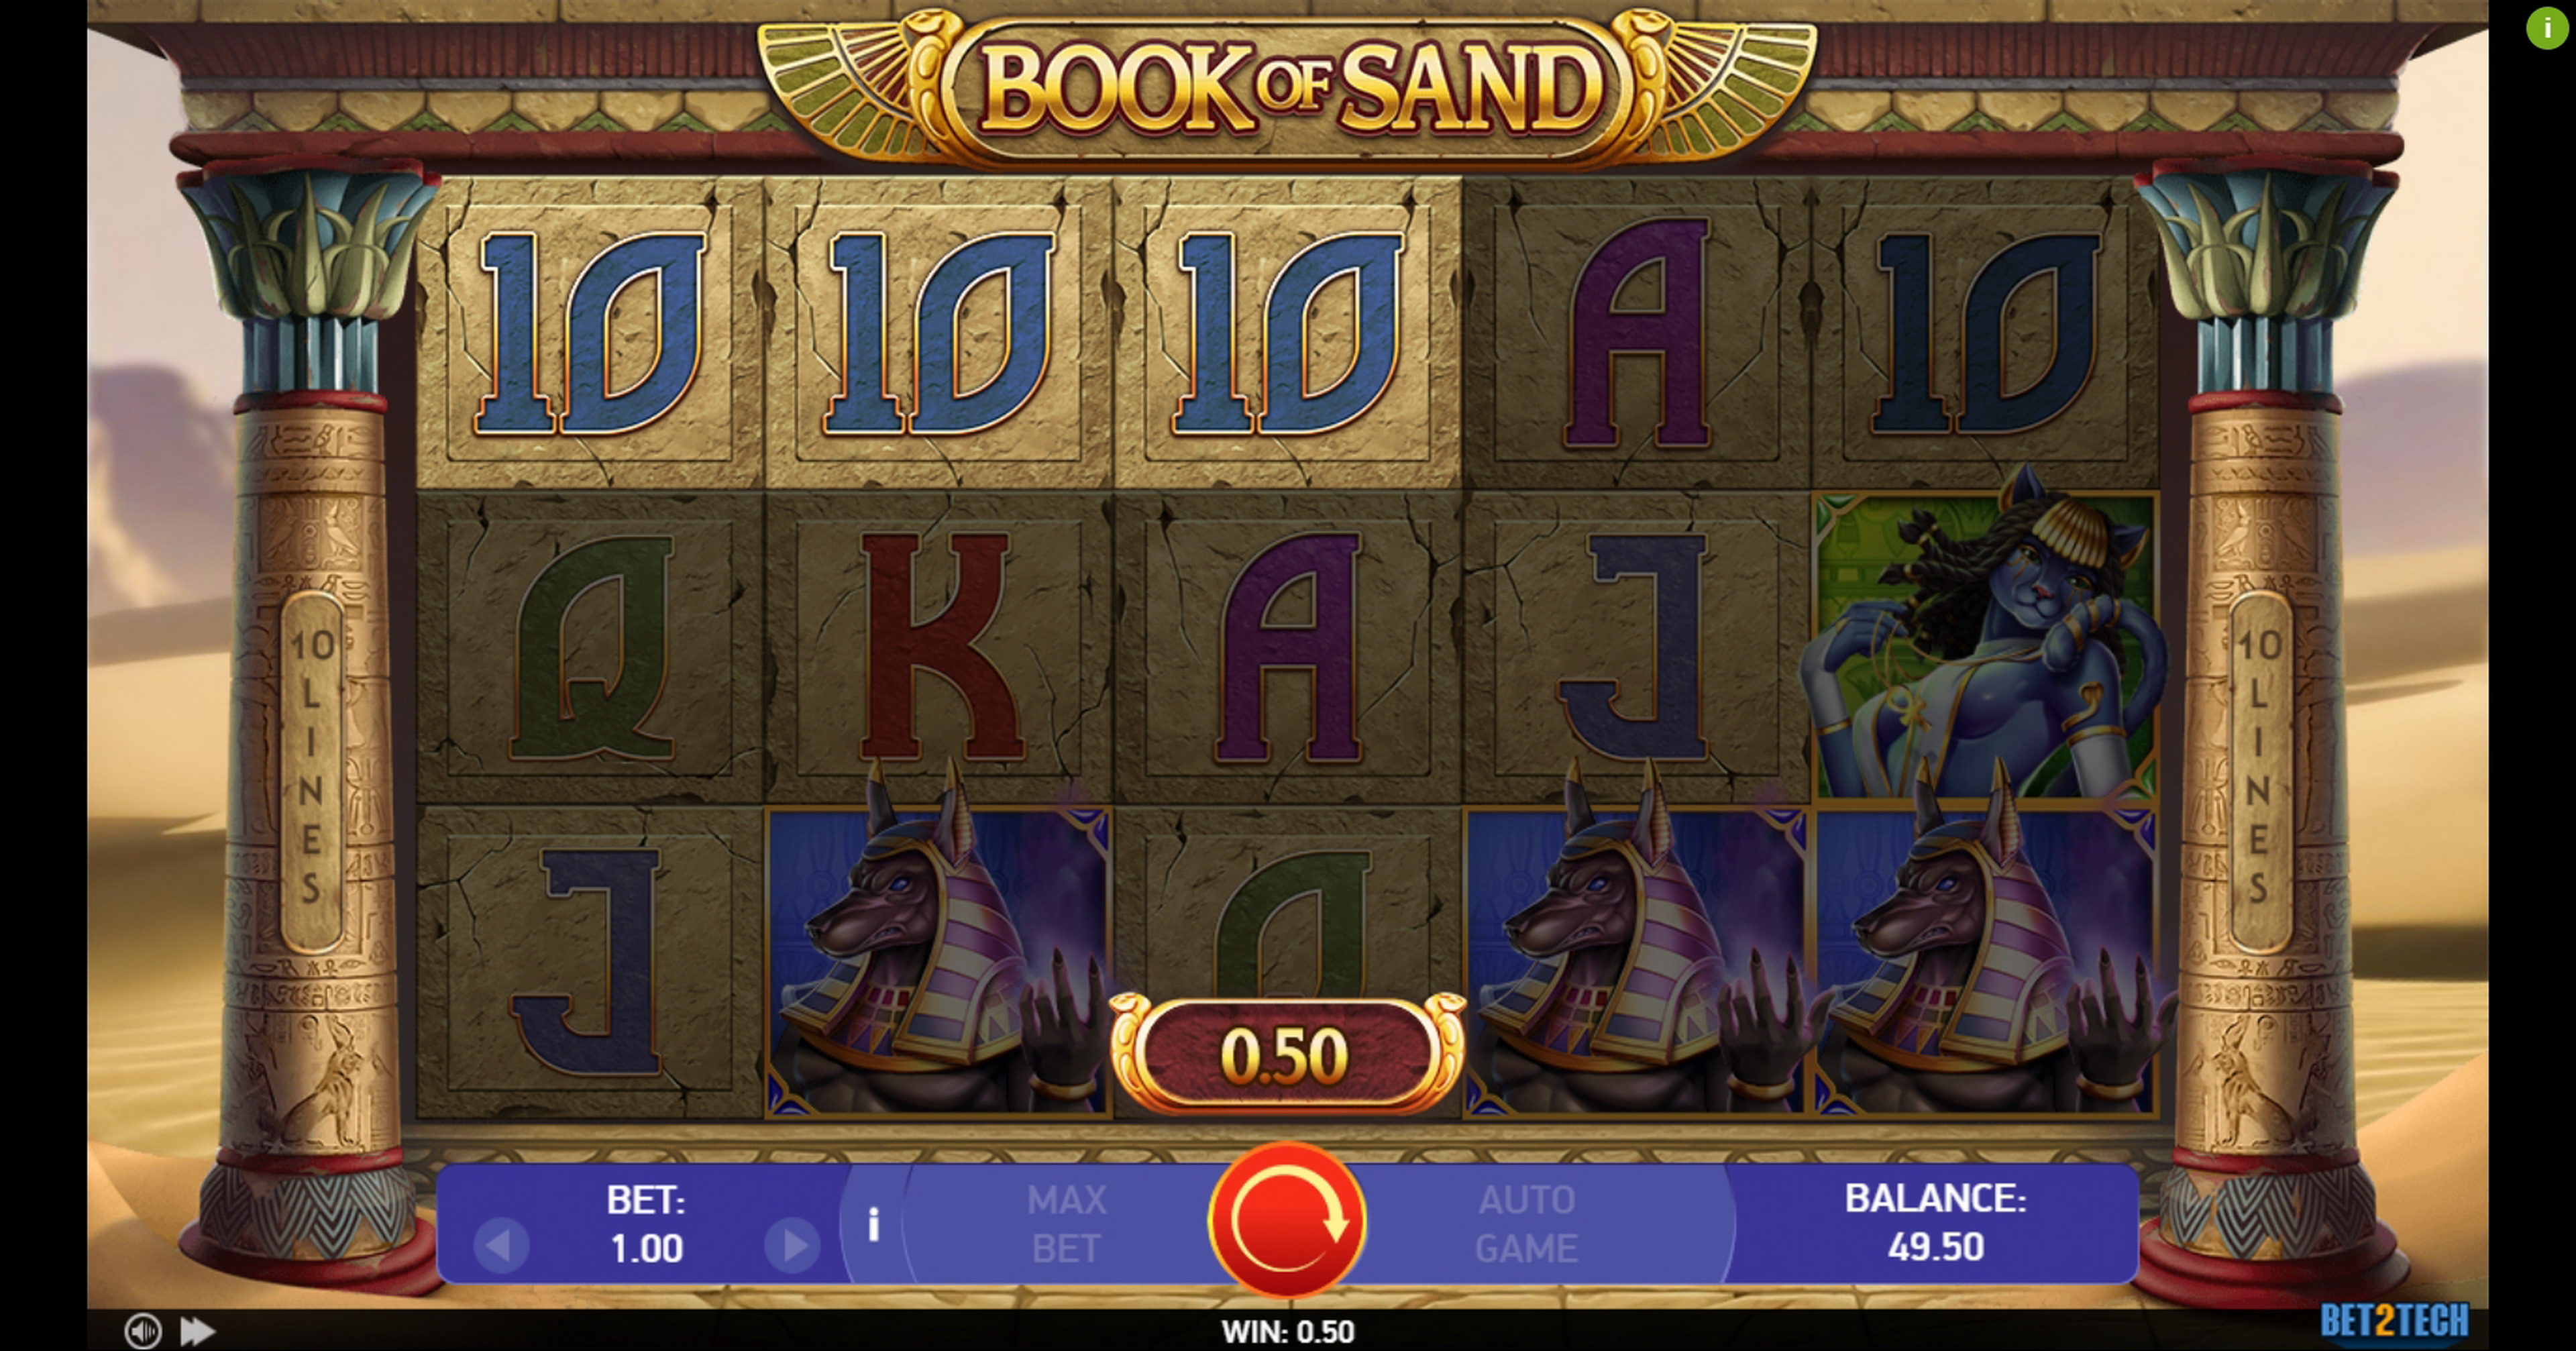 Win Money in Book of Sand Free Slot Game by Bet2Tech